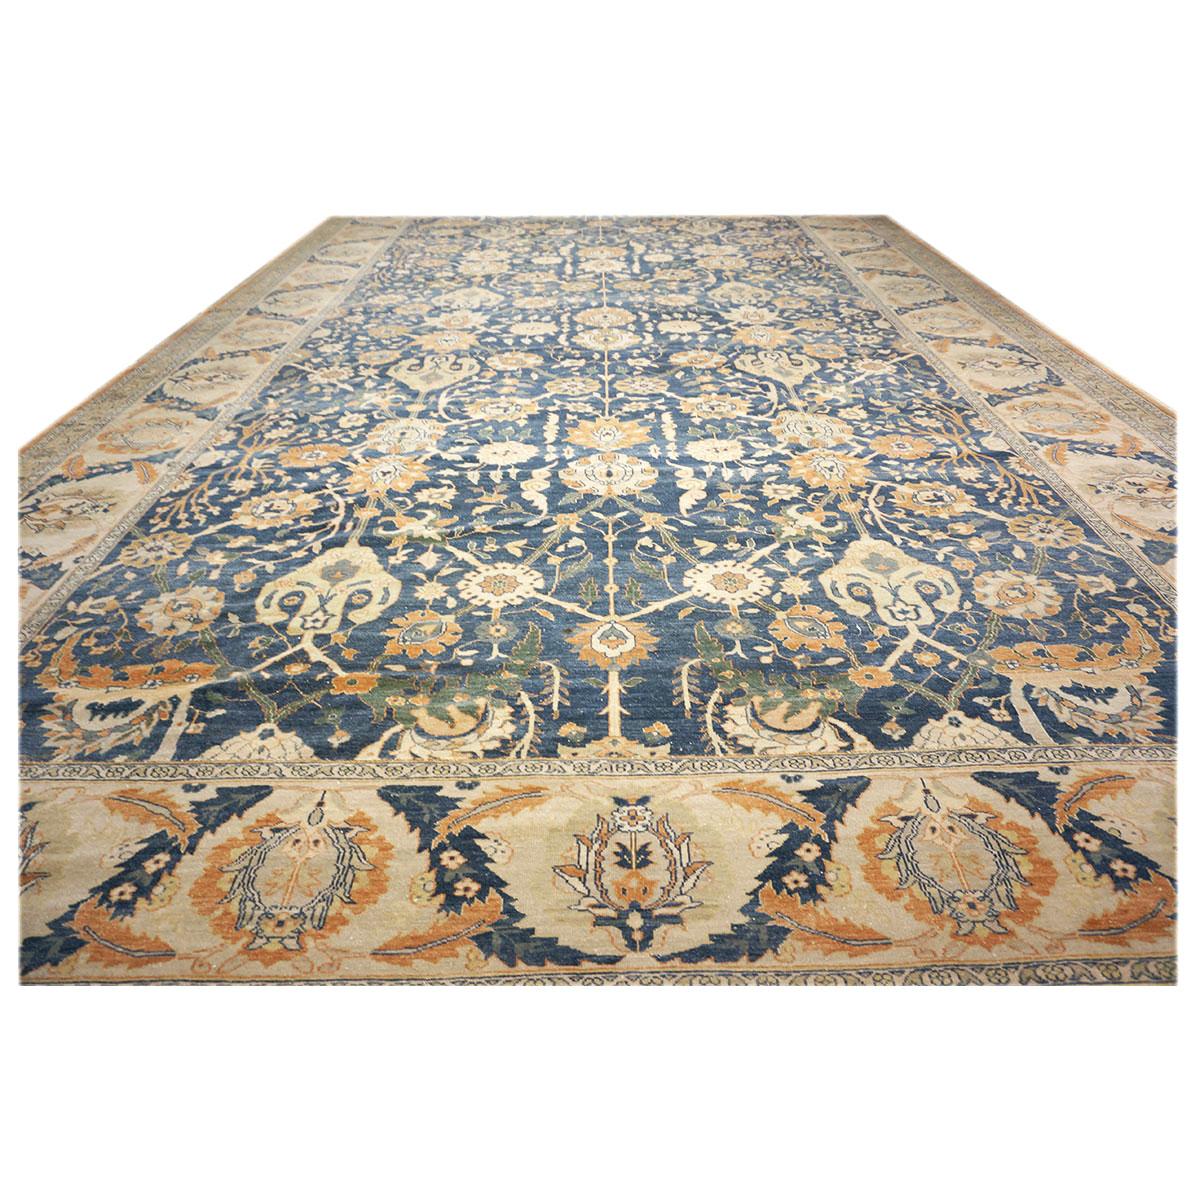 13x21 area rugs